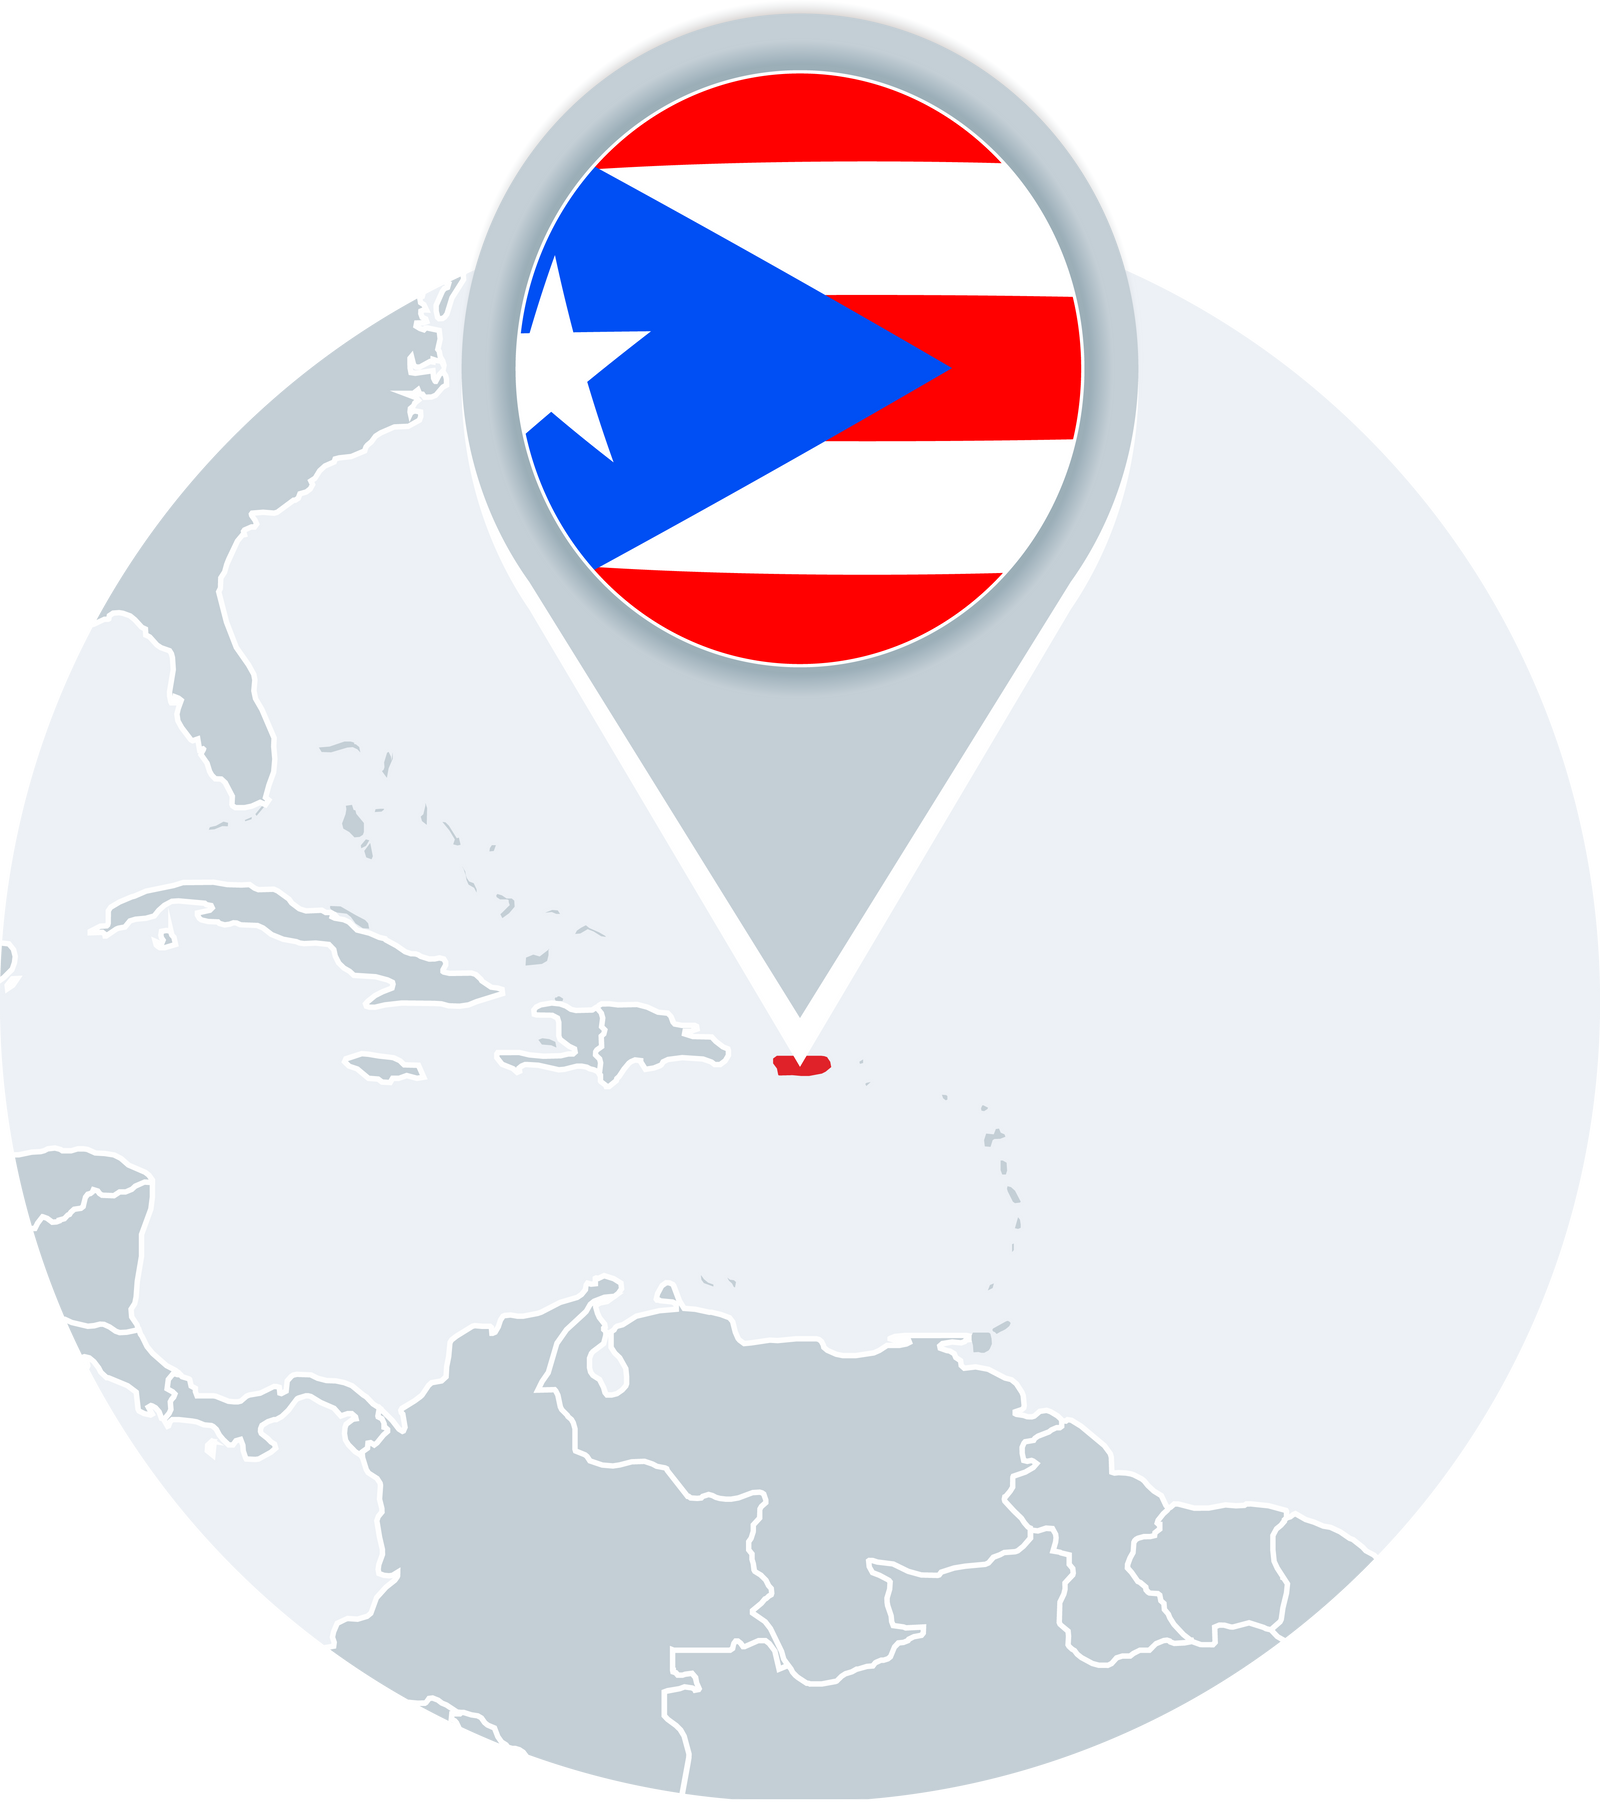 Puerto Rico map and flag, map icon with highlighted Puerto Rico